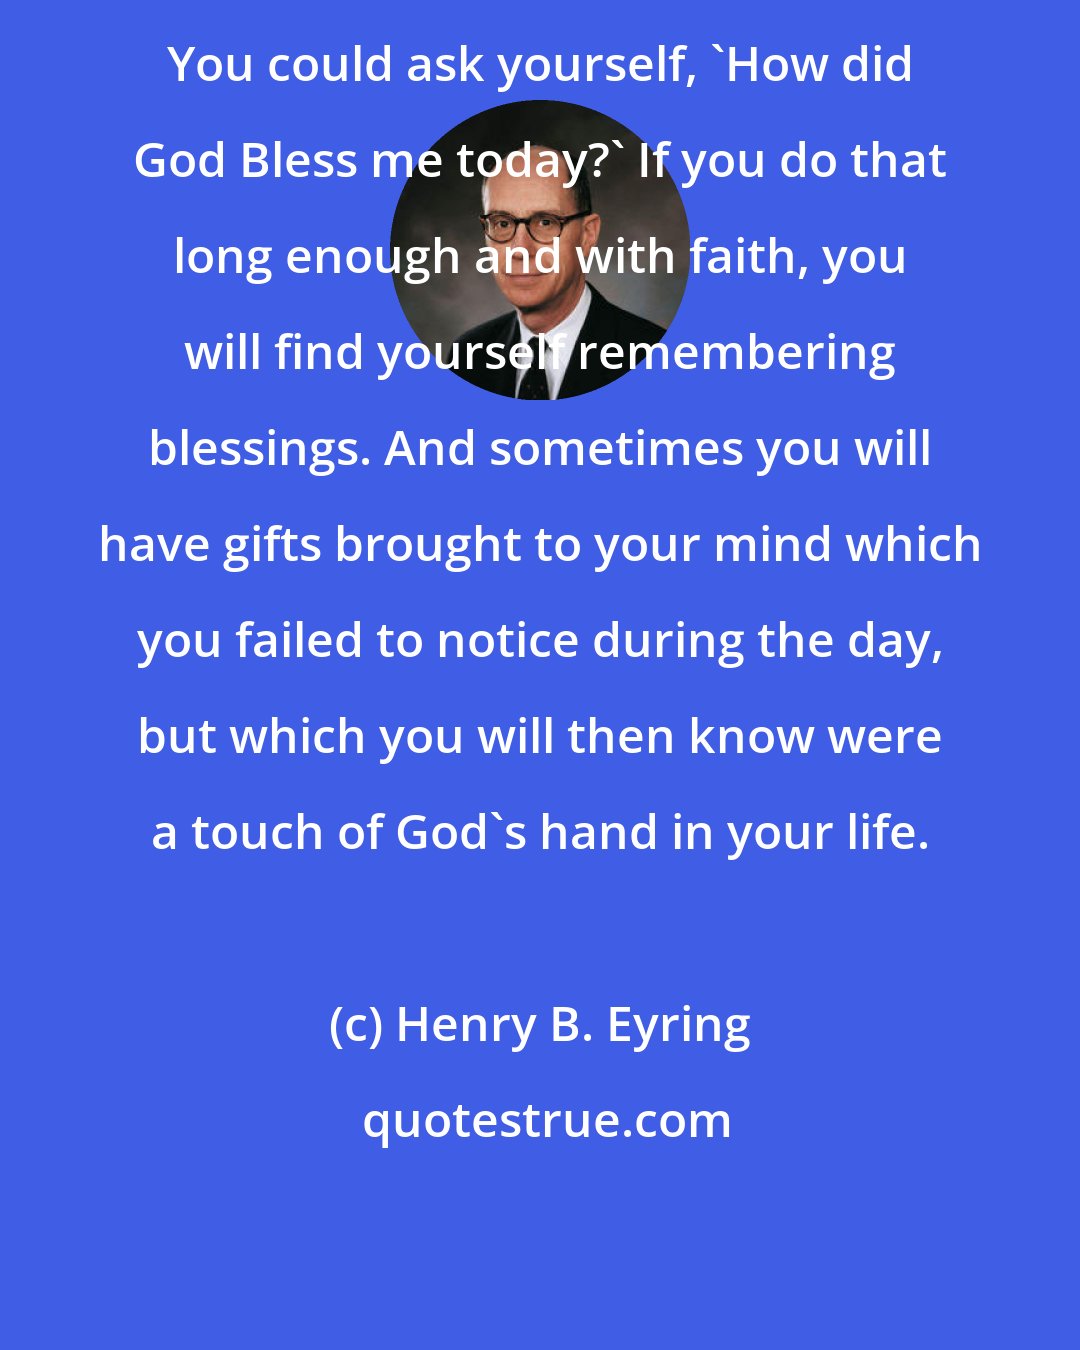 Henry B. Eyring: You could ask yourself, 'How did God Bless me today?' If you do that long enough and with faith, you will find yourself remembering blessings. And sometimes you will have gifts brought to your mind which you failed to notice during the day, but which you will then know were a touch of God's hand in your life.